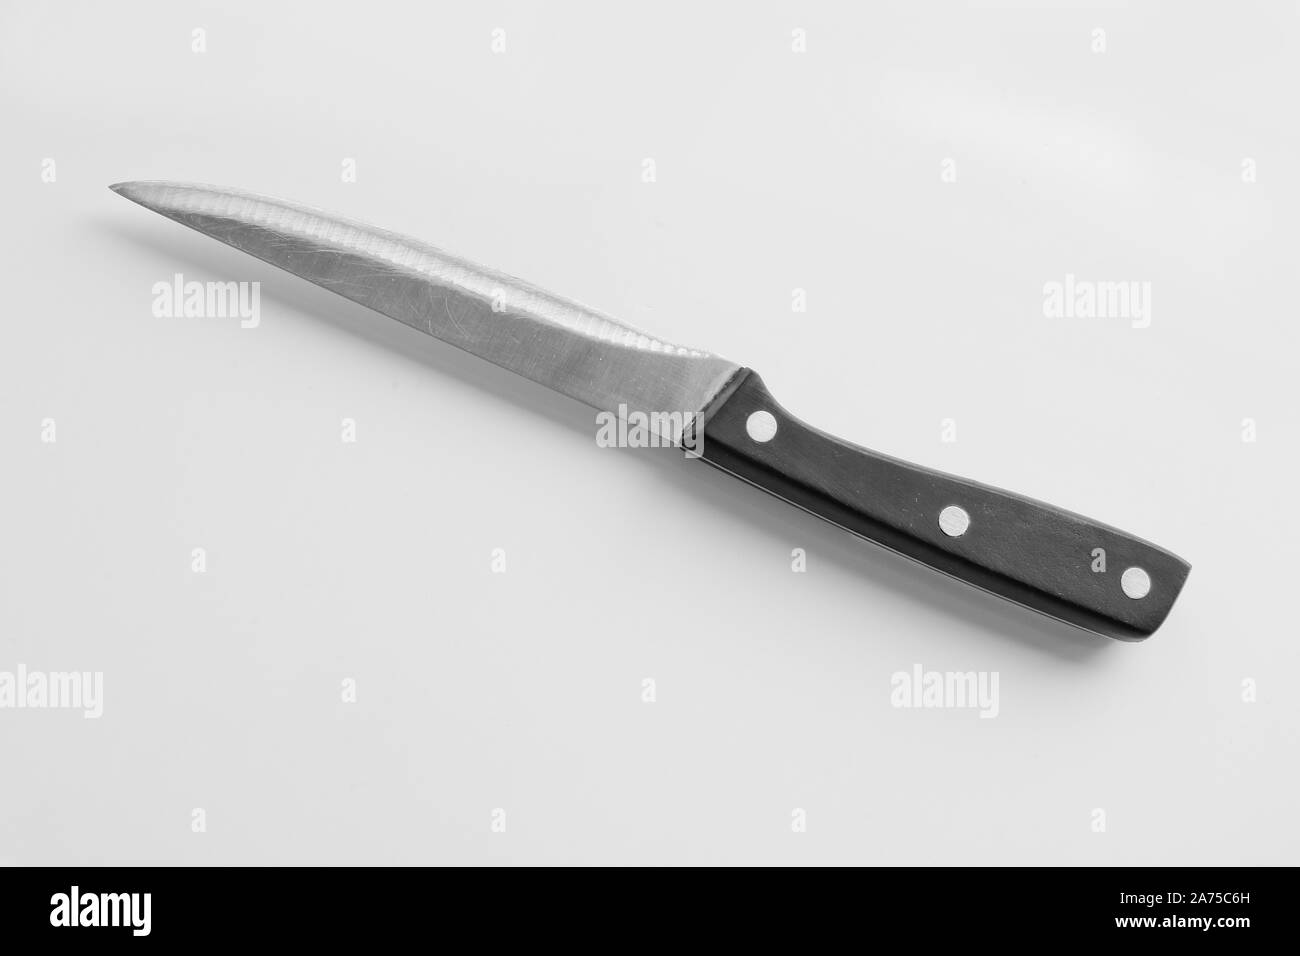 Kitchen utensils - a universal knife with a black plastic handle on a light background. Cooking tools. Stock Photo